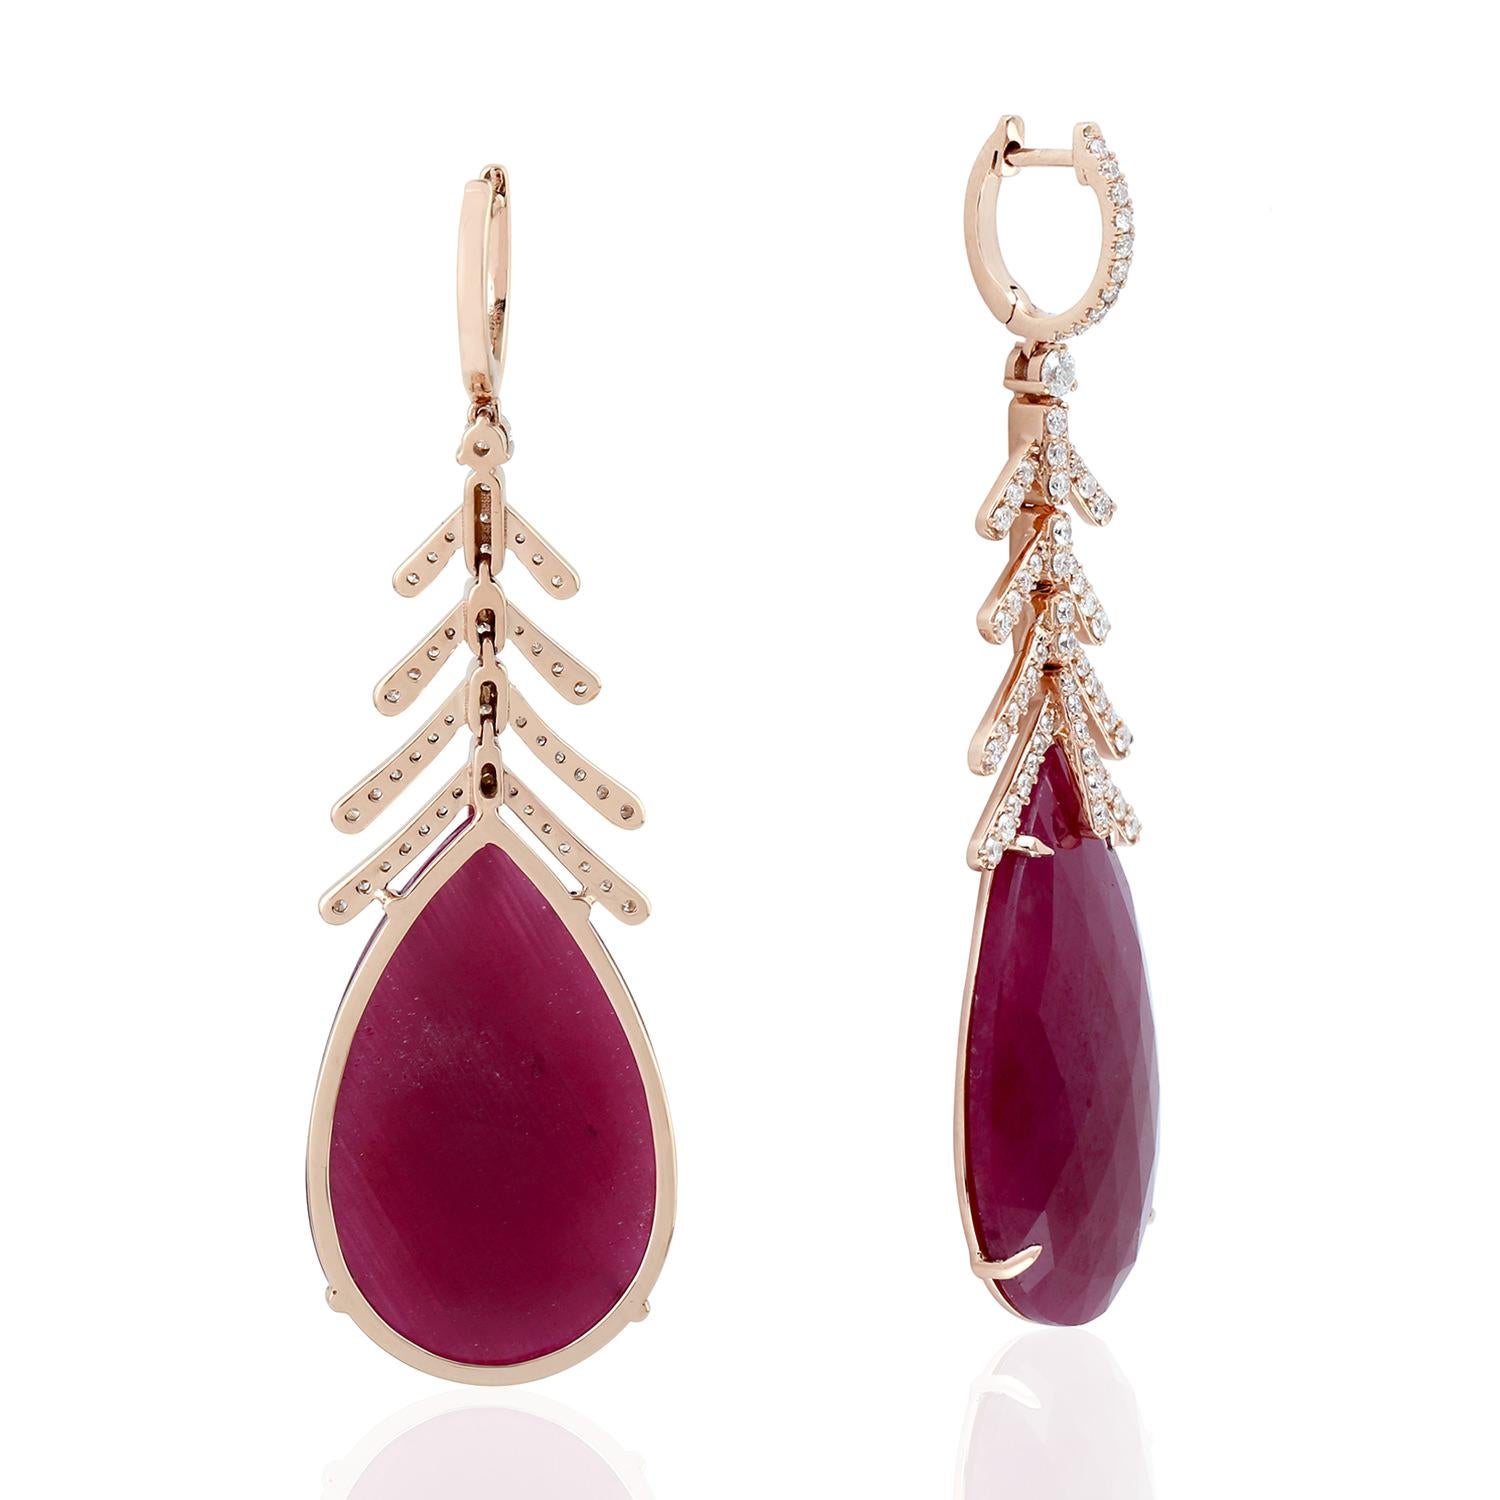 Designer srop shape faceted slice Ruby earring with Leaf design on top set in 18K Gold with Diamonds

18KT Gold: 6.579gms
Diamond: 1.02cts
Ruby: 38.42cts
